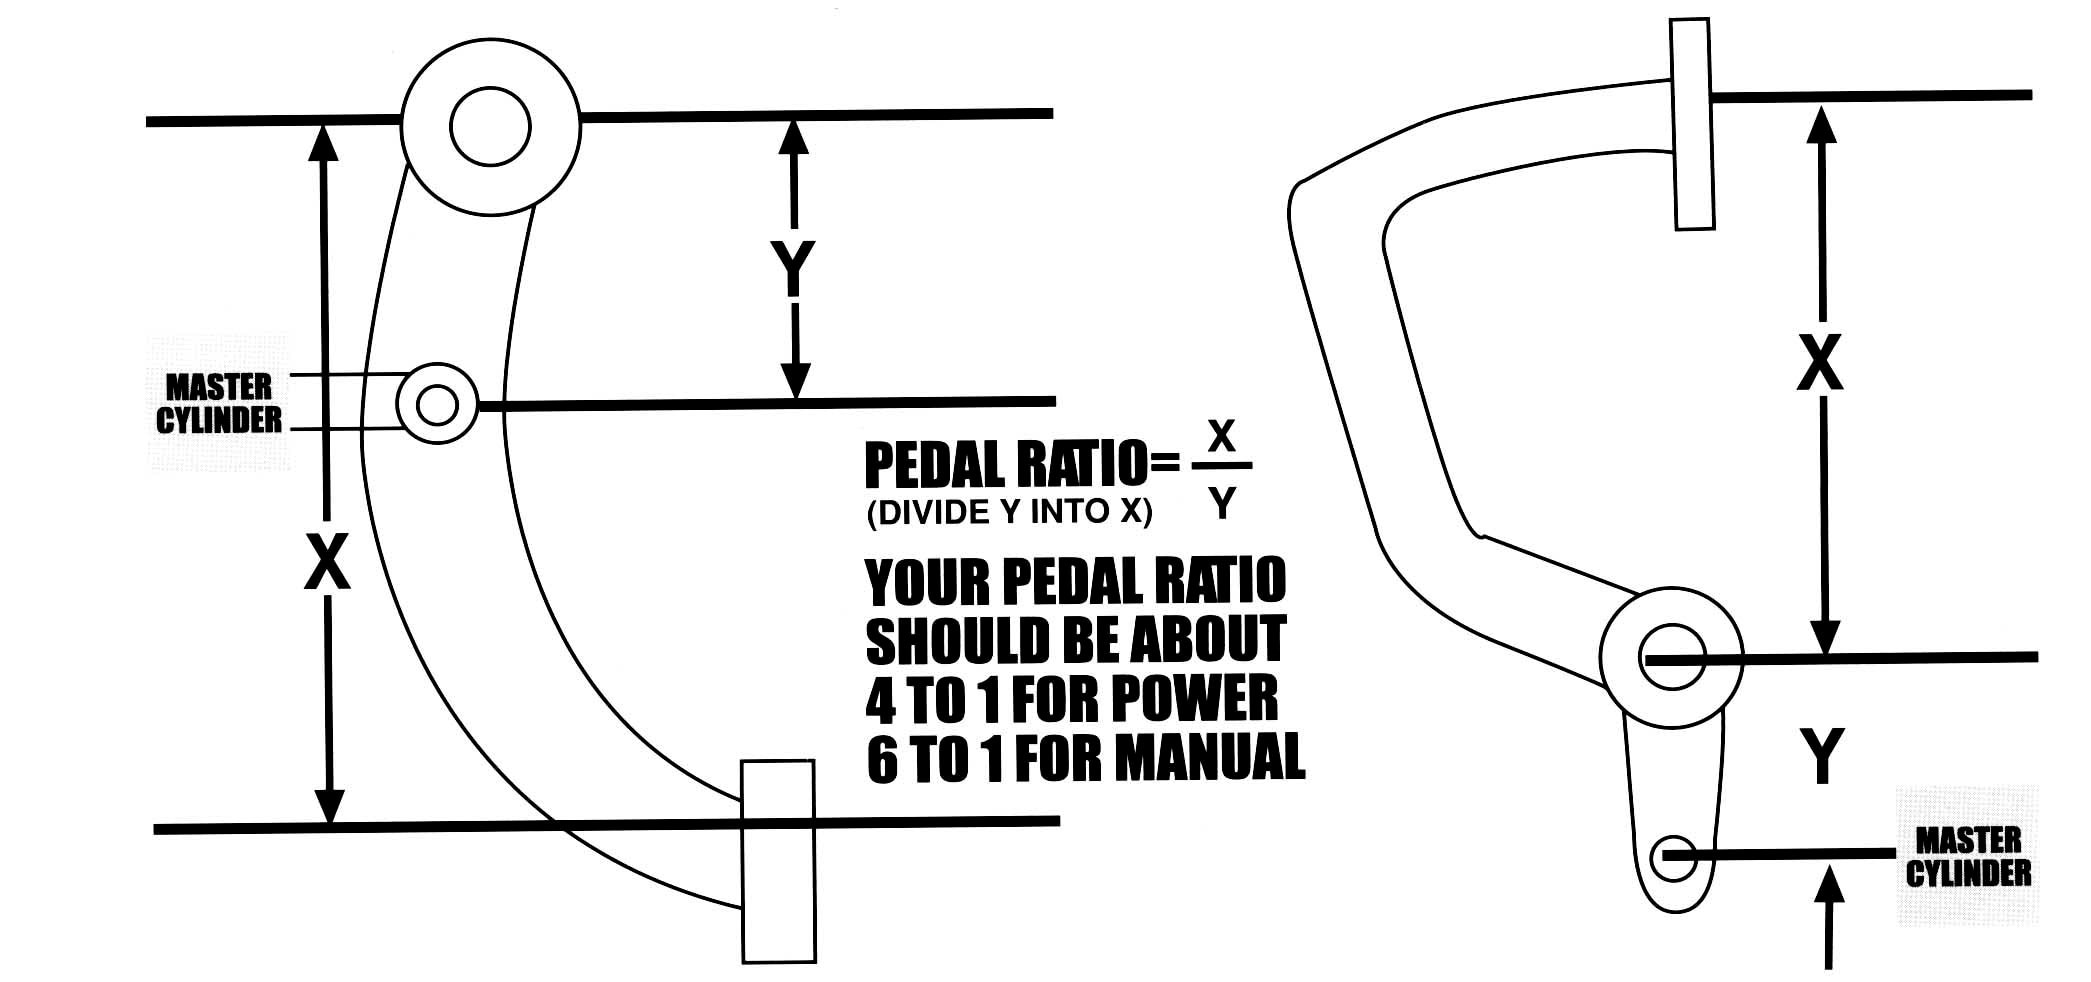 Brake Booster Parts Diagram Selecting and Installing Brake System Ponents Proper Plumbing Of Brake Booster Parts Diagram